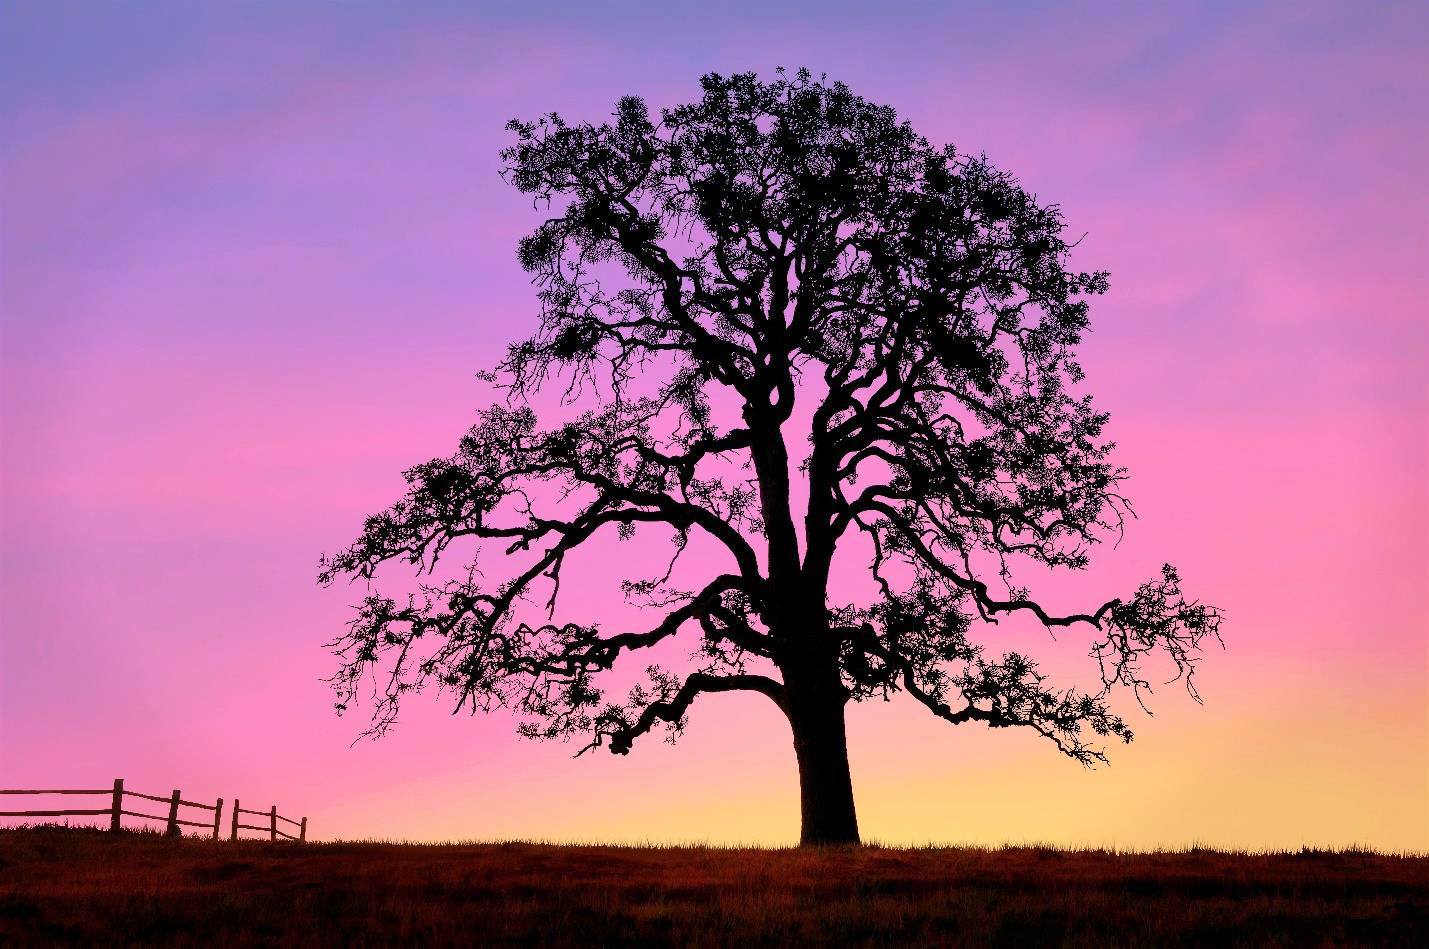 Tree silhouetted afore a surreal sunset